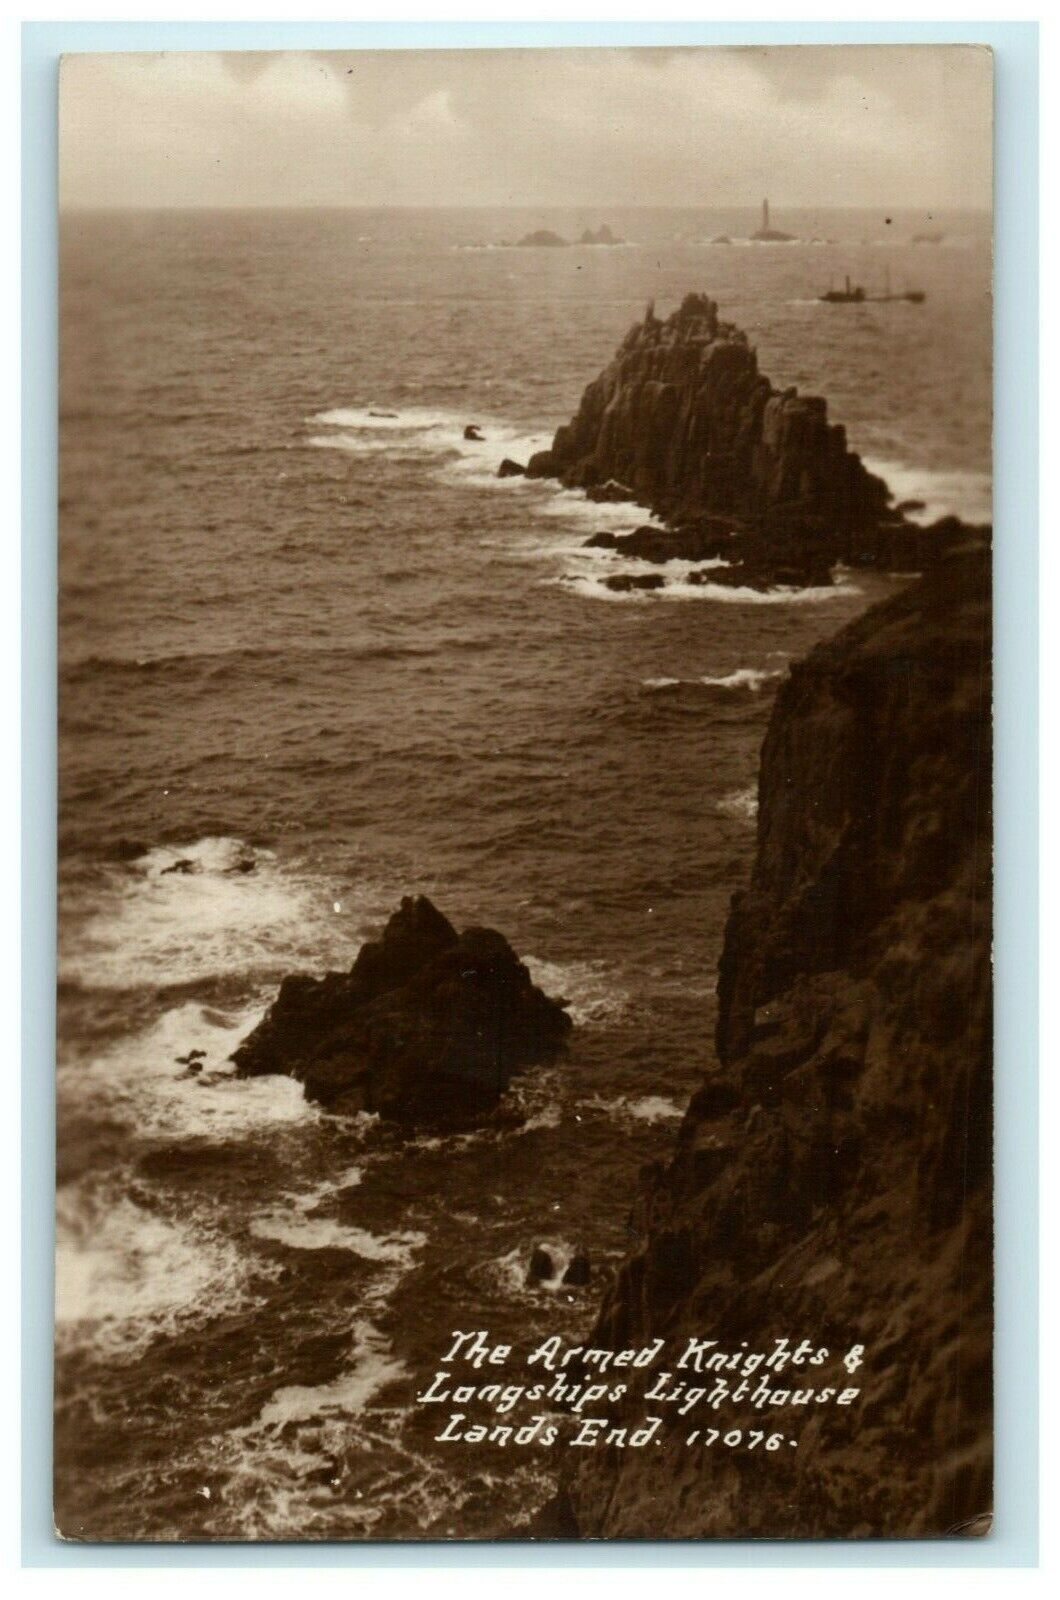 1924 Armed Knights & Longships Lighthouse Lands End Cornwall England Postcard